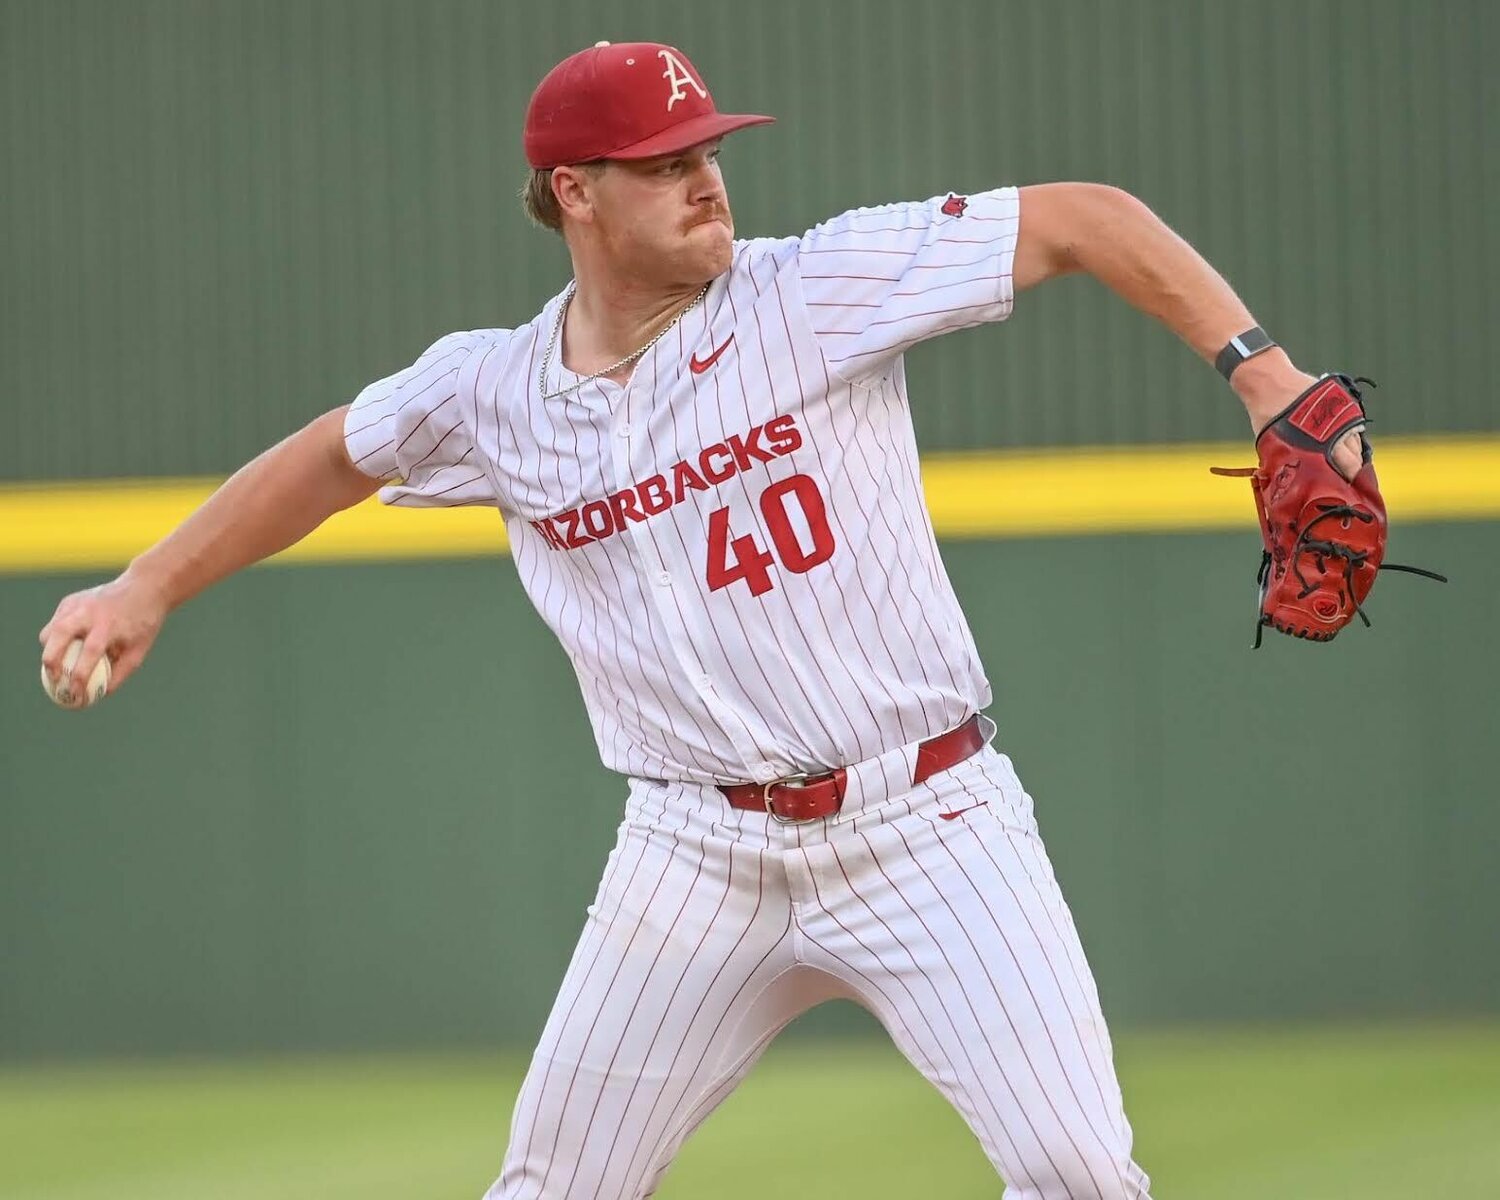 CRAVEN WHITLOW/NATE ALLEN SPORTS SERVICES   Razorback sophomore pitcher Ben Bybee from Overland Park, Kan. attempts a pickoff at first base against Mississippi State at Baum-Walker Stadium&nbsp;in Fayetteville. Arkansas was eliminated in two games in the SEC Tournament.